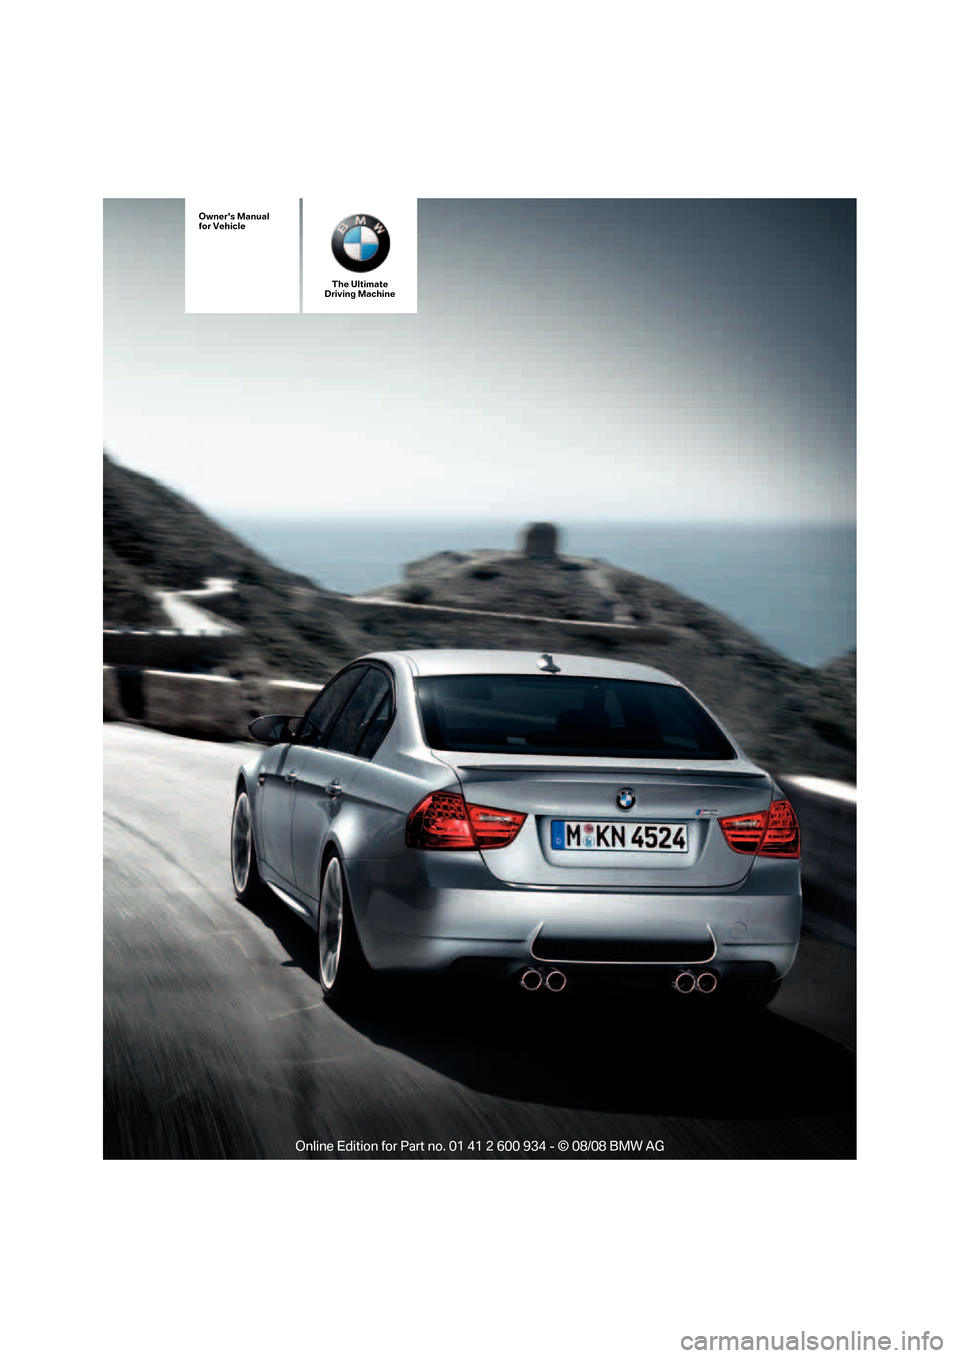 BMW M3 SEDAN 2009 E90 Owners Manual The Ultimate
Driving Machine
Owners Manual
for Vehicle
ba8_E90M3_cic.book  Seite 1  Dienstag, 19. August 2008  11:51 11 